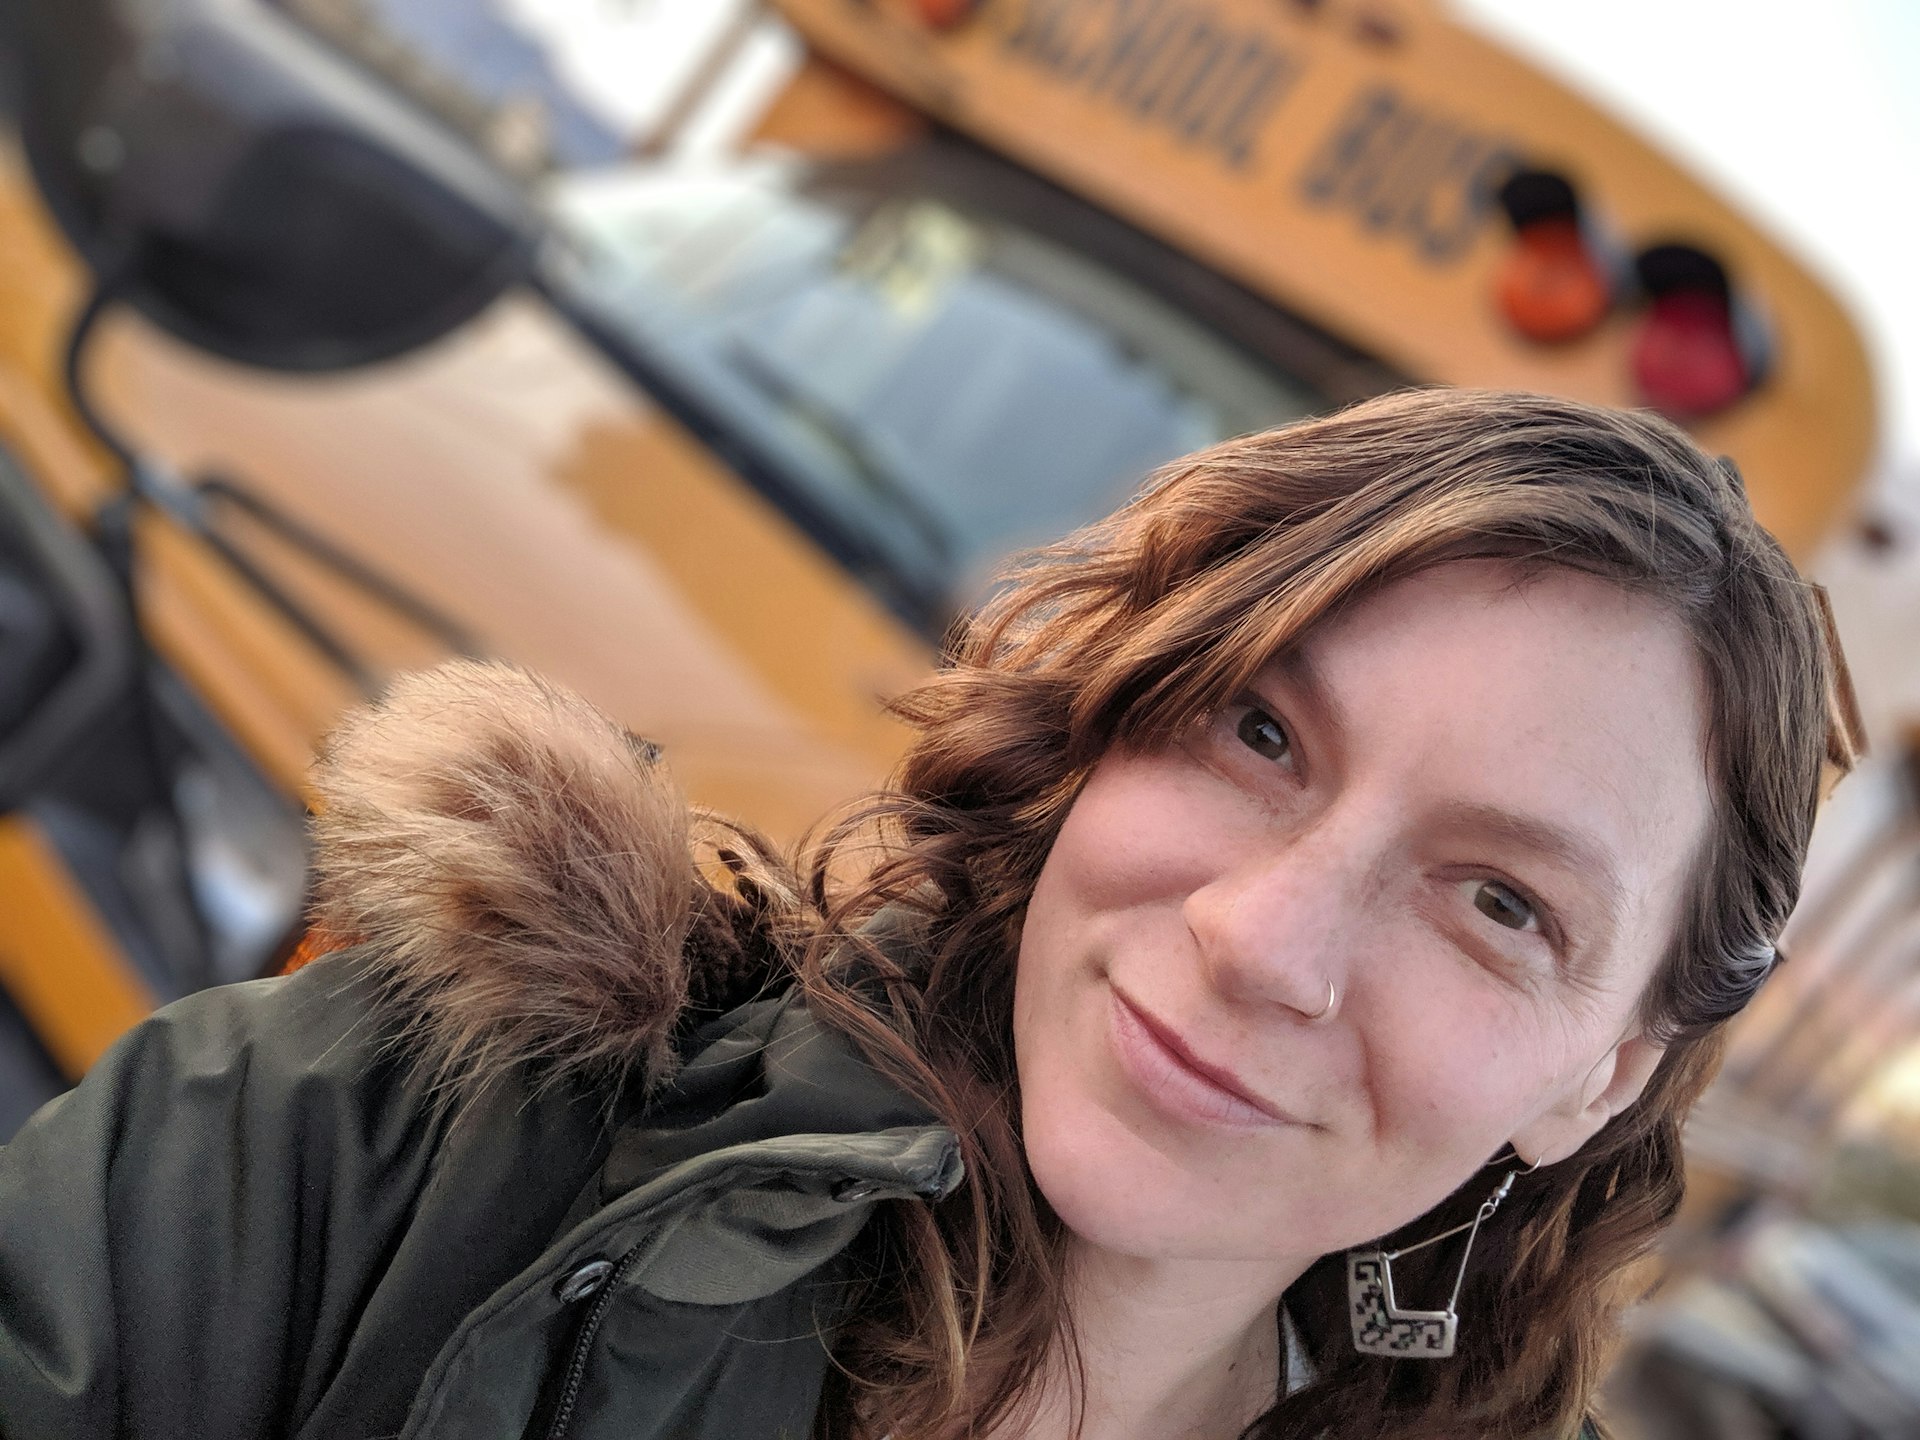 Madeleine poses with a Mona Lisa smile in front of her yellow school bus